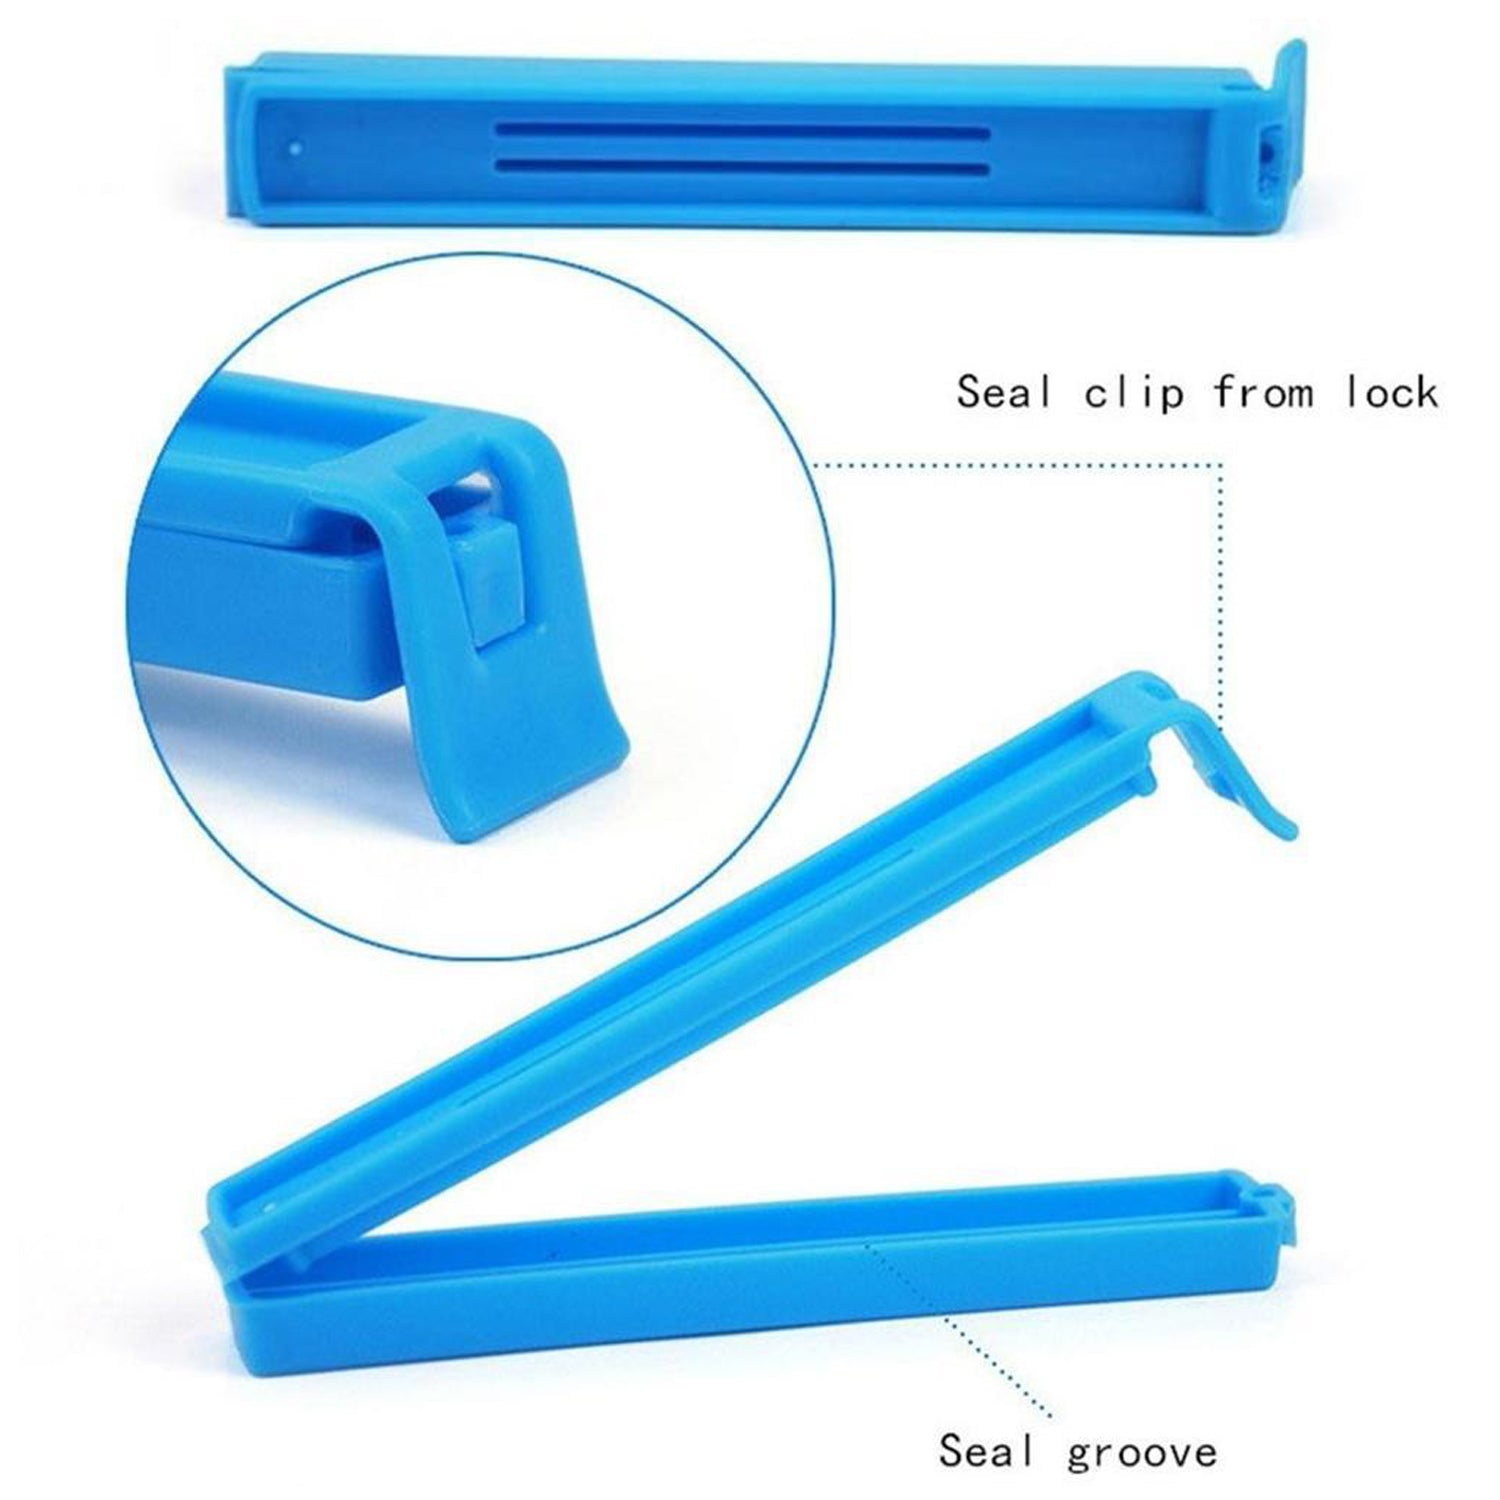 2707 100 Pc Food Sealing Clip used in all kinds of household and official kitchen places for sealing and covering packed food stuff and items.